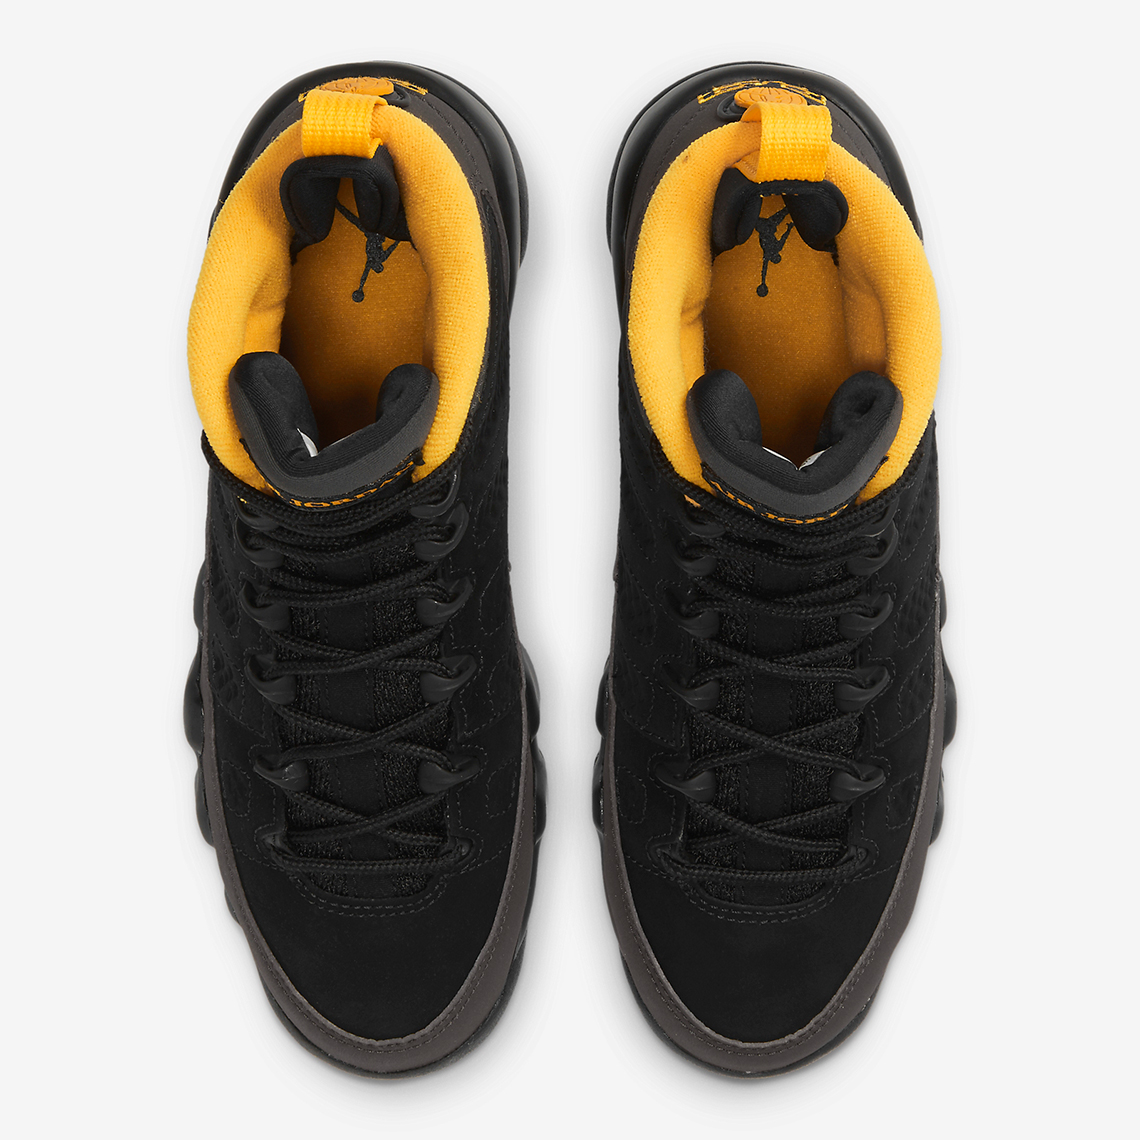 to officially launch at select Jordan Brand retailers on April 12th University Gold Gs 302359 070 8